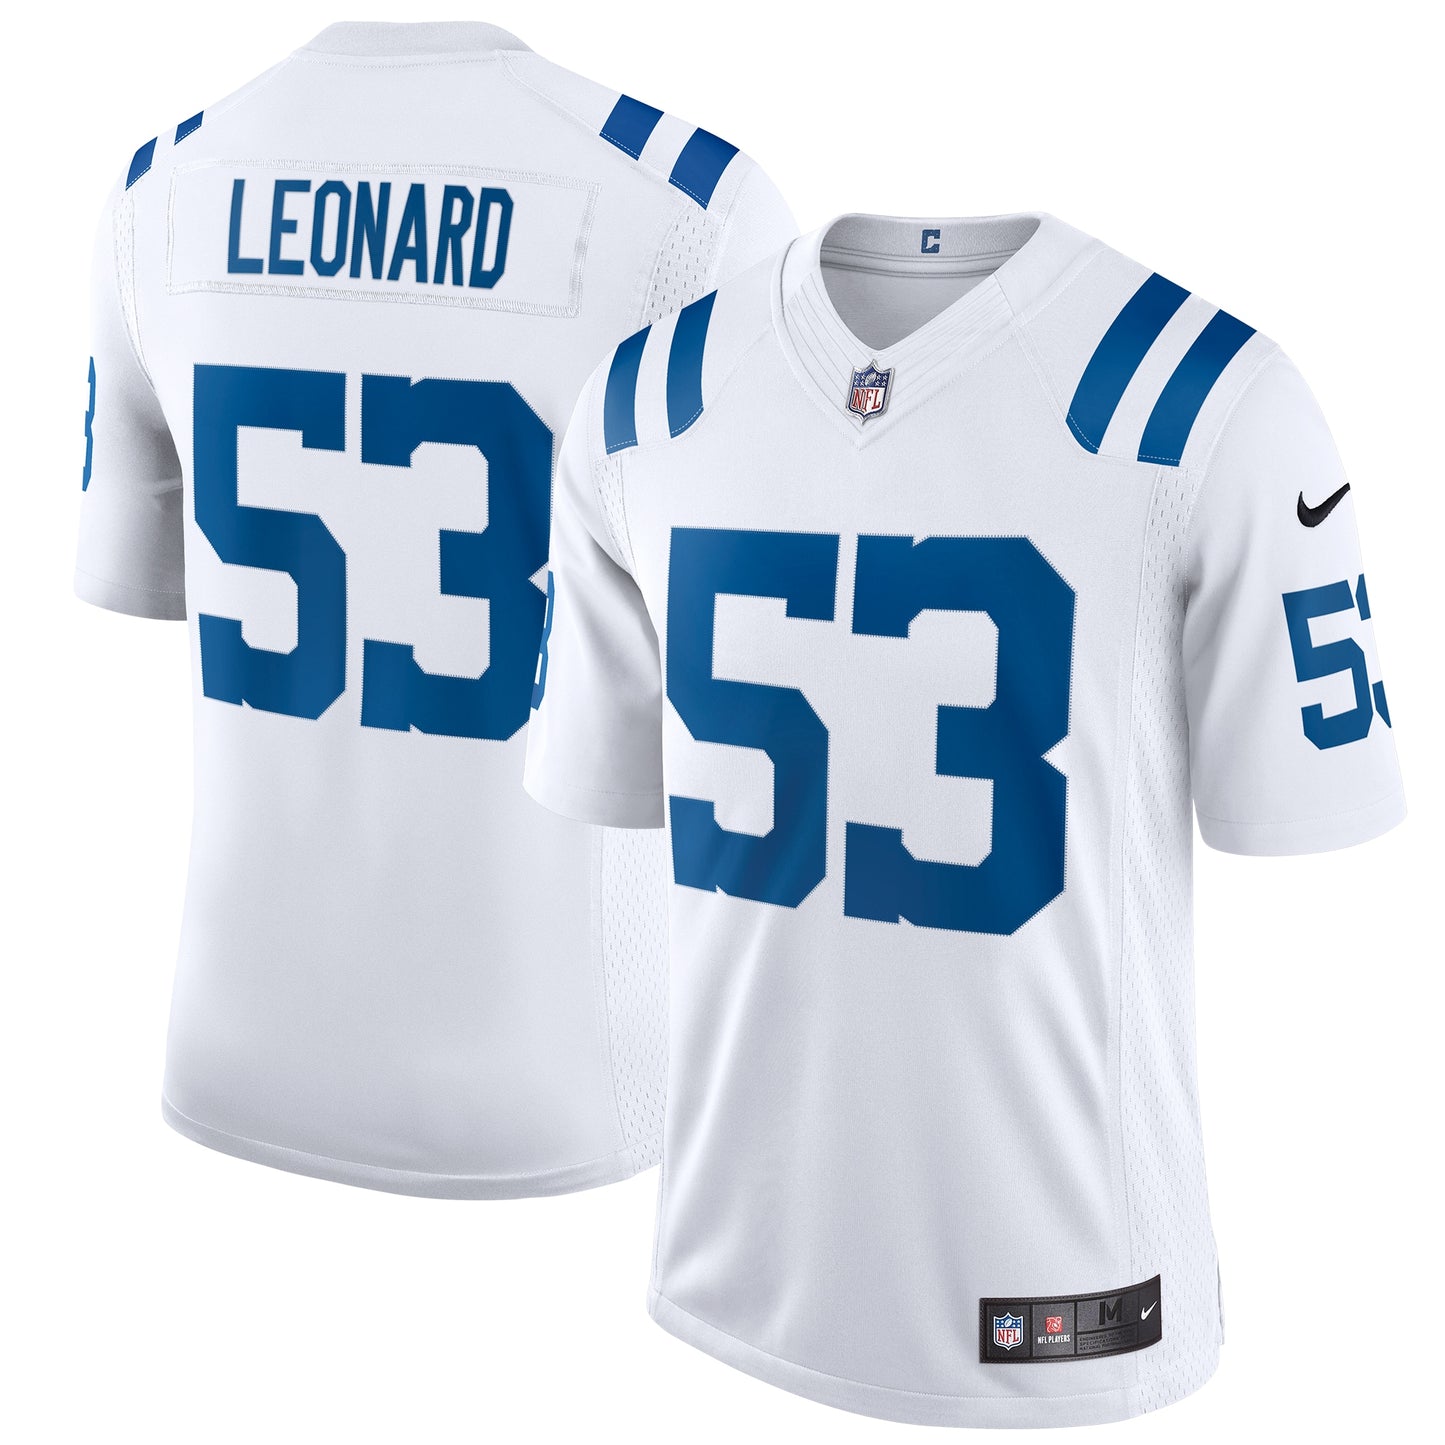 Shaquille Leonard Indianapolis Colts Nike Vapor Limited Jersey - White